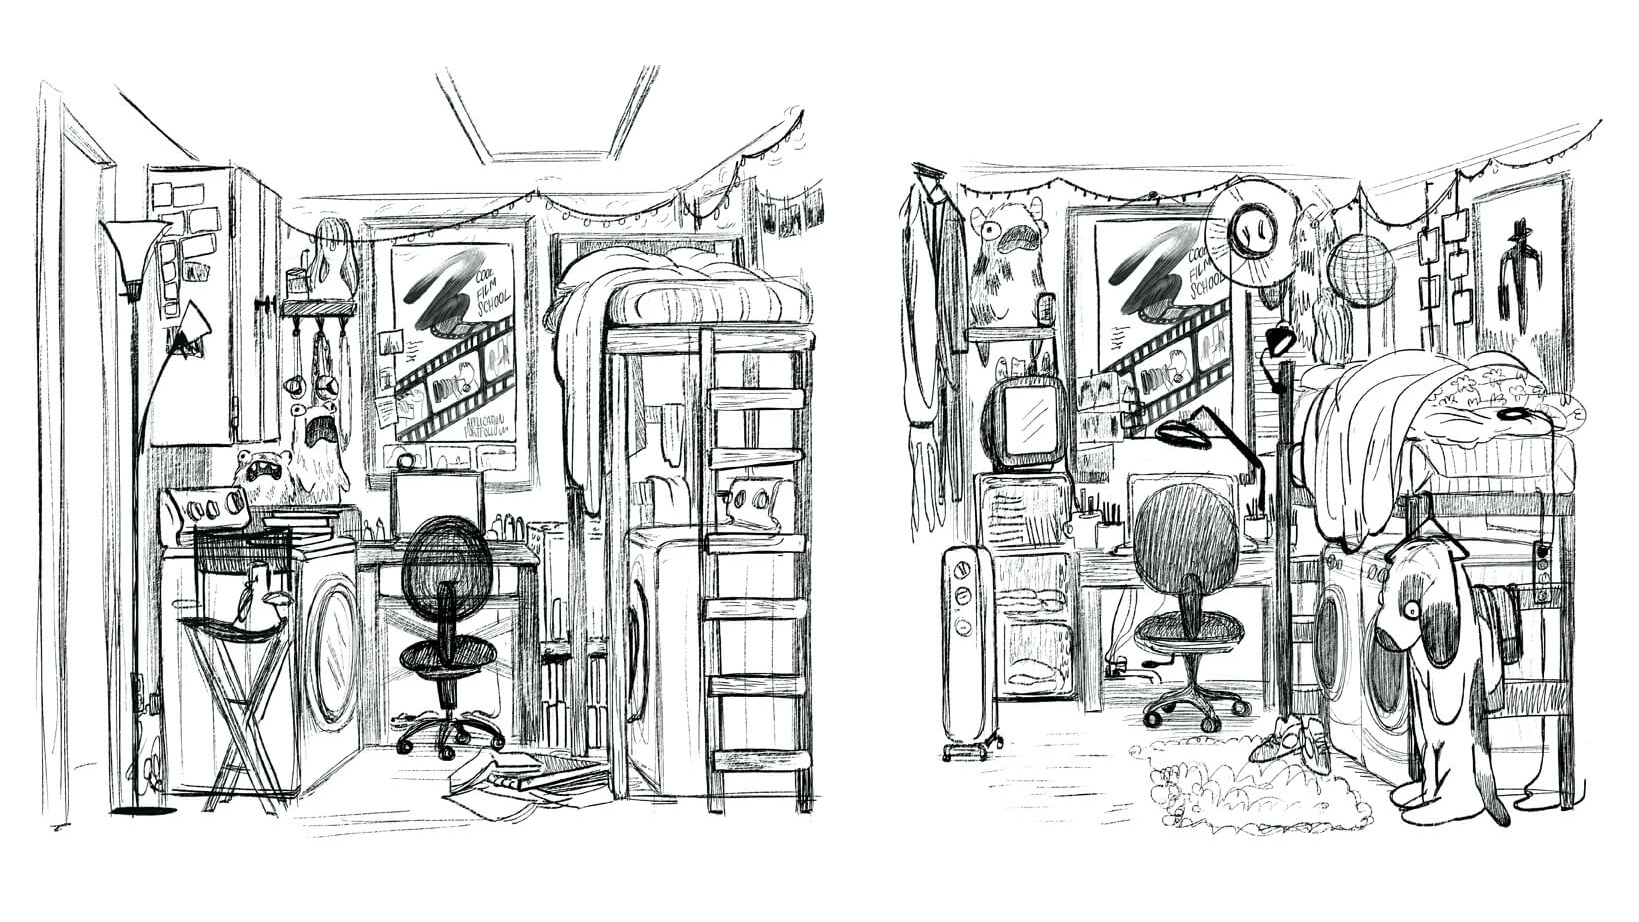 A pencil sketched triptych of Katie’s bedroom, each portrayal with a different configuration. All three feature a raised bed, a washer and dryer, clothes strewn about, a desk and desk chair, and filming equipment.